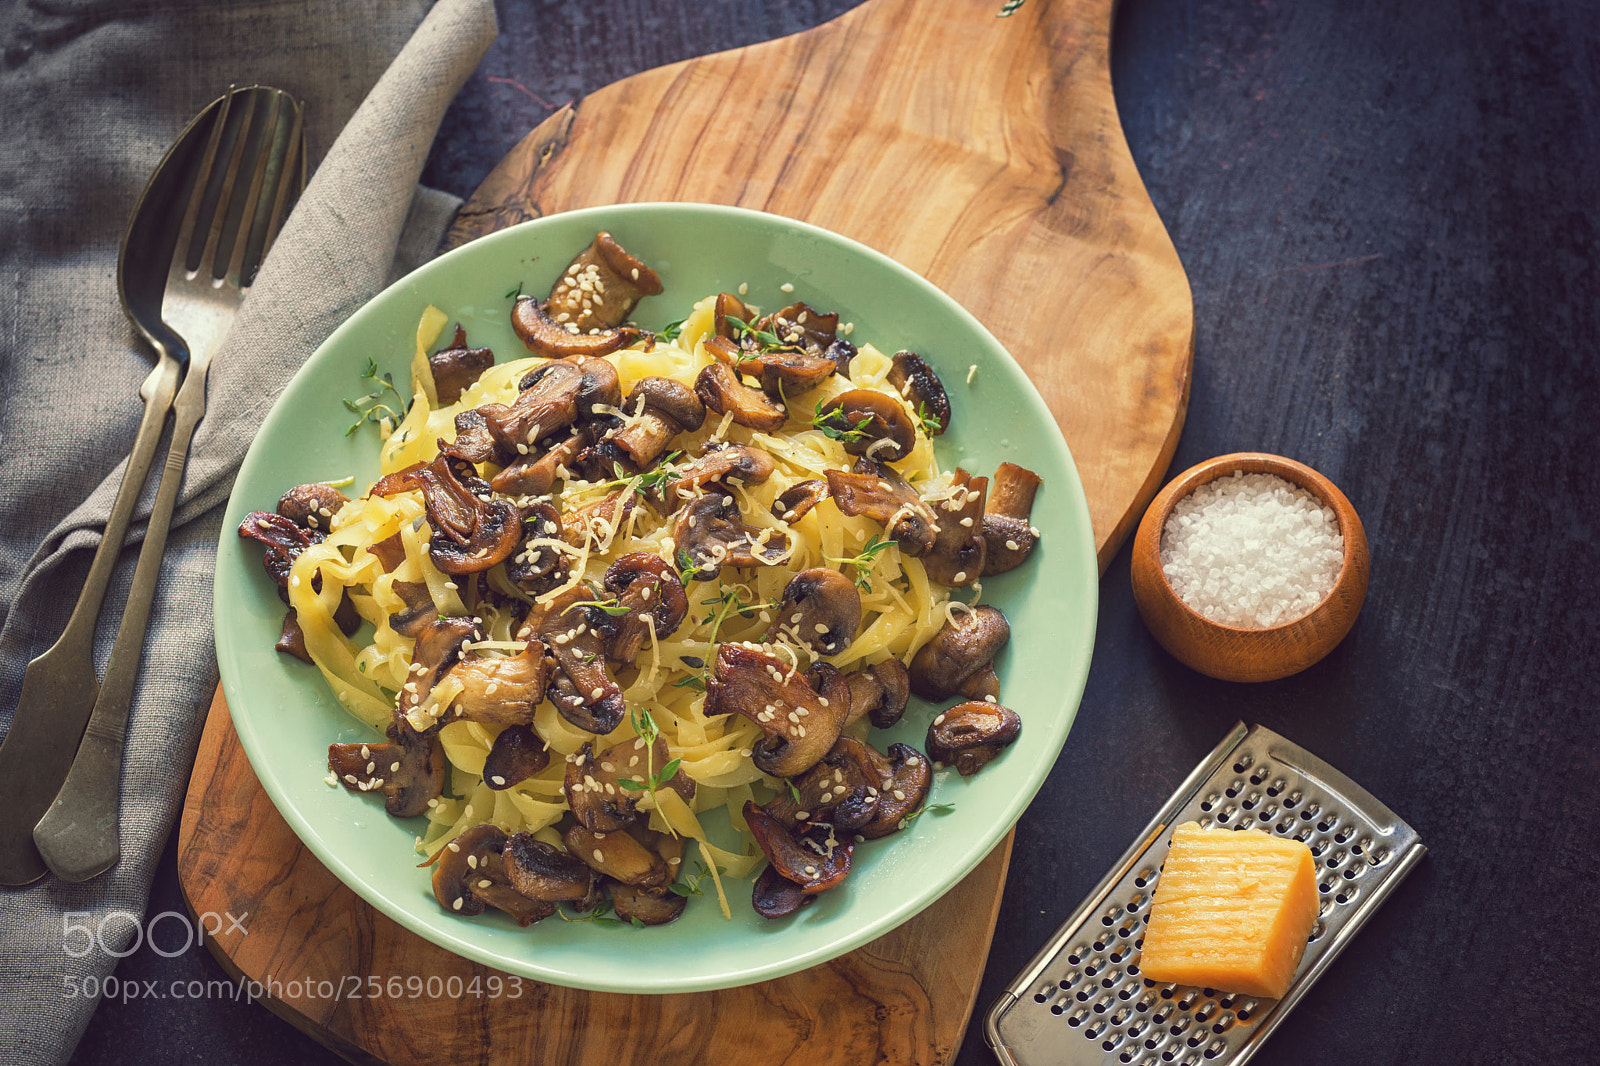 Sony a6300 sample photo. Tagliatelle with grilled mushrooms photography